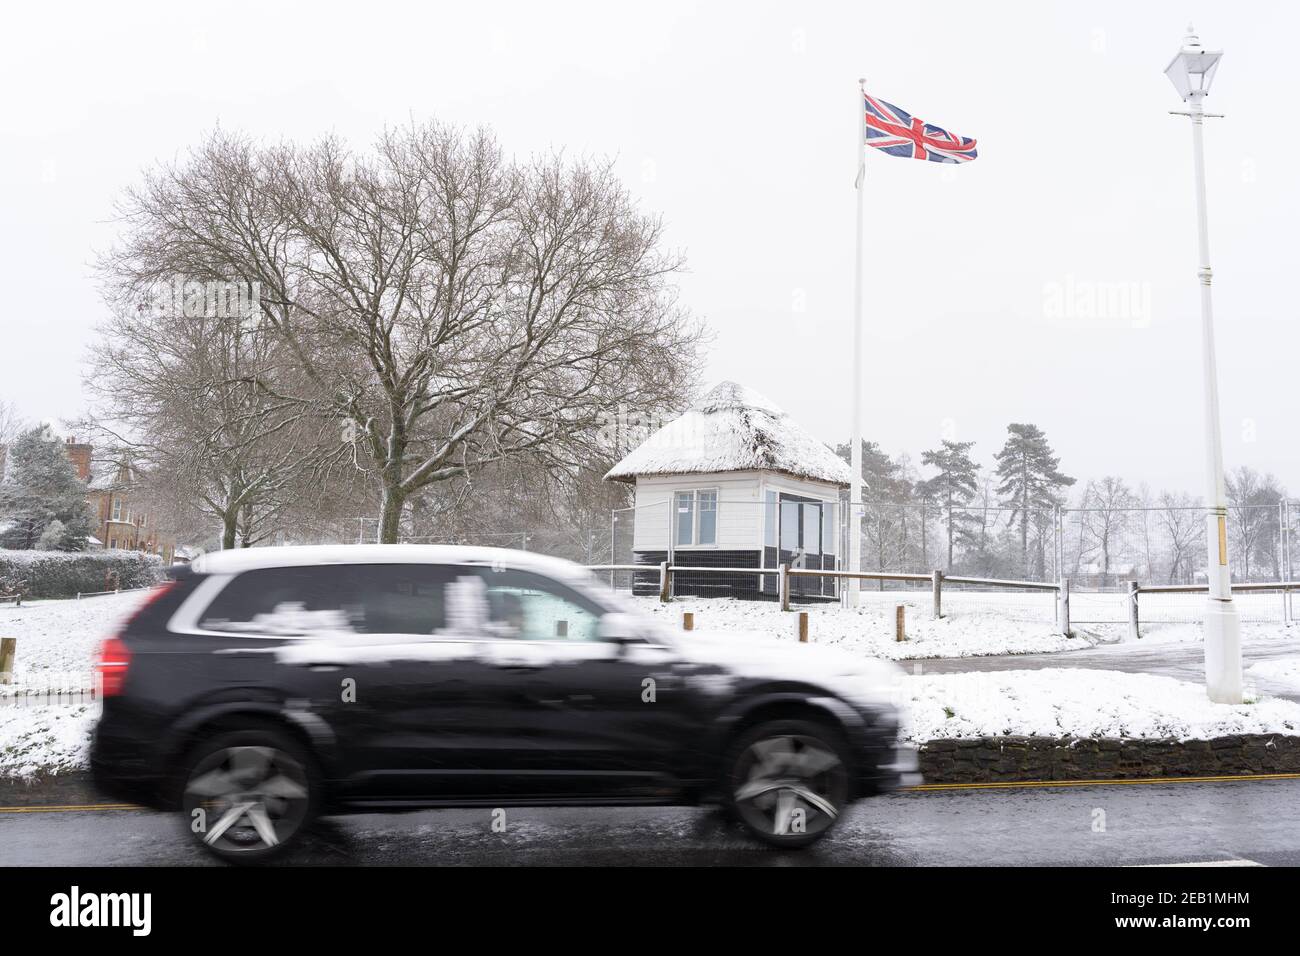 Union flag flying in the snow shower, black Suv car covered in snow Sevenoaks, Kent, England Stock Photo